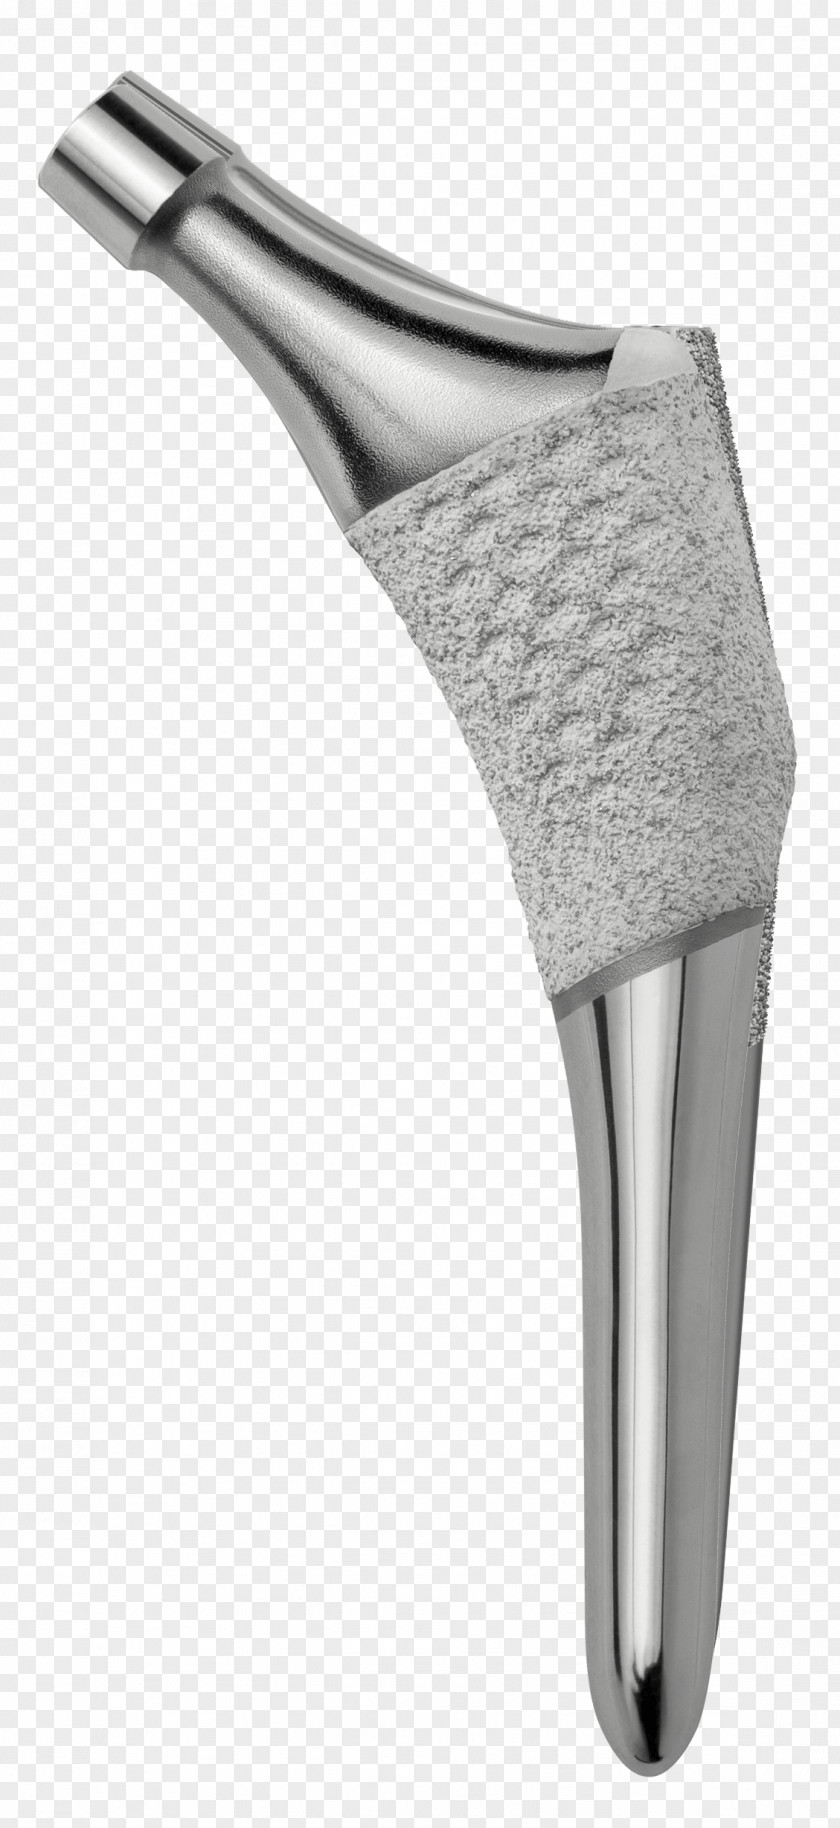 Implants Hip Replacement Implant Femur Itsourtree.com PNG